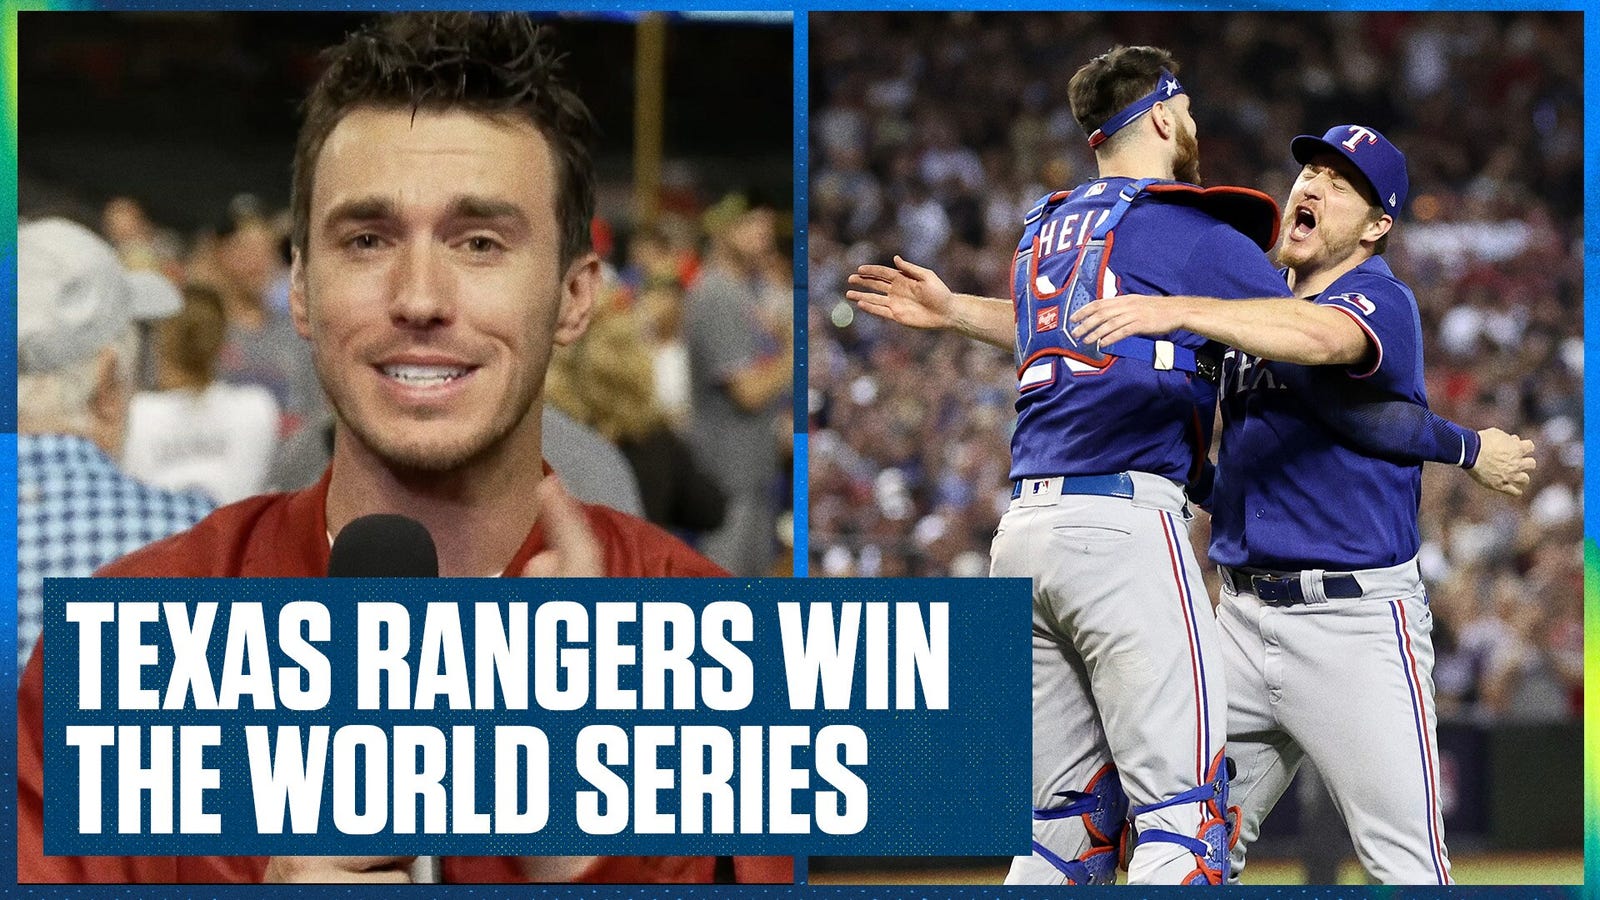 Rangers are World Series champs for first time in franchise history